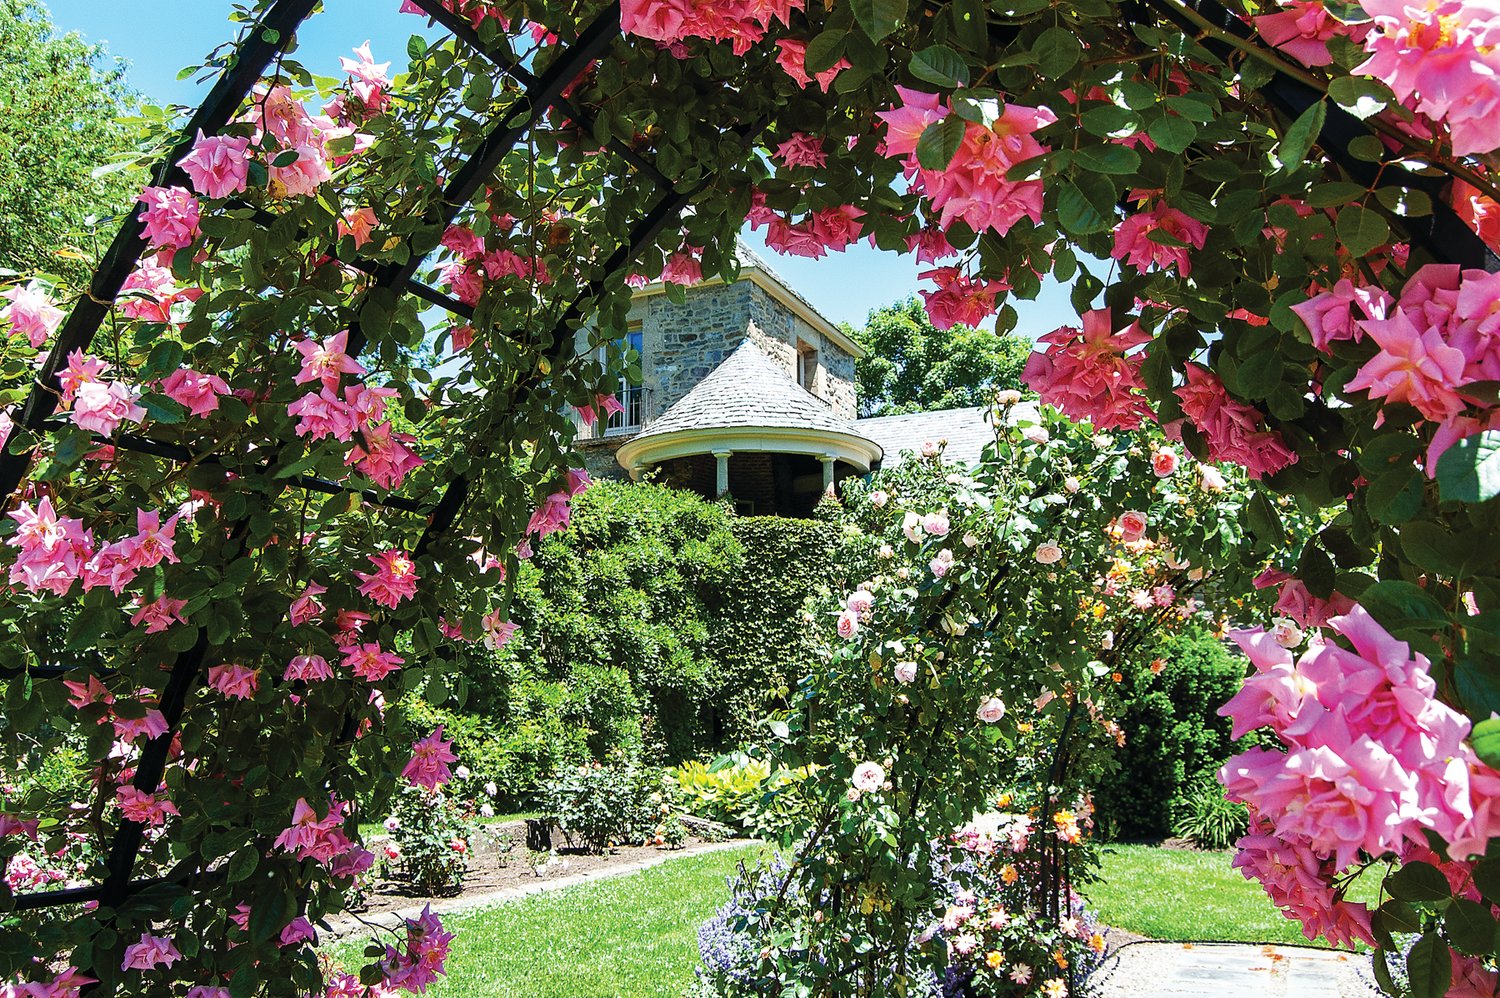 The Rose Garden at Andalusia was in full bloom in May 2020. The former Biddle family estate opens for the season April 1.